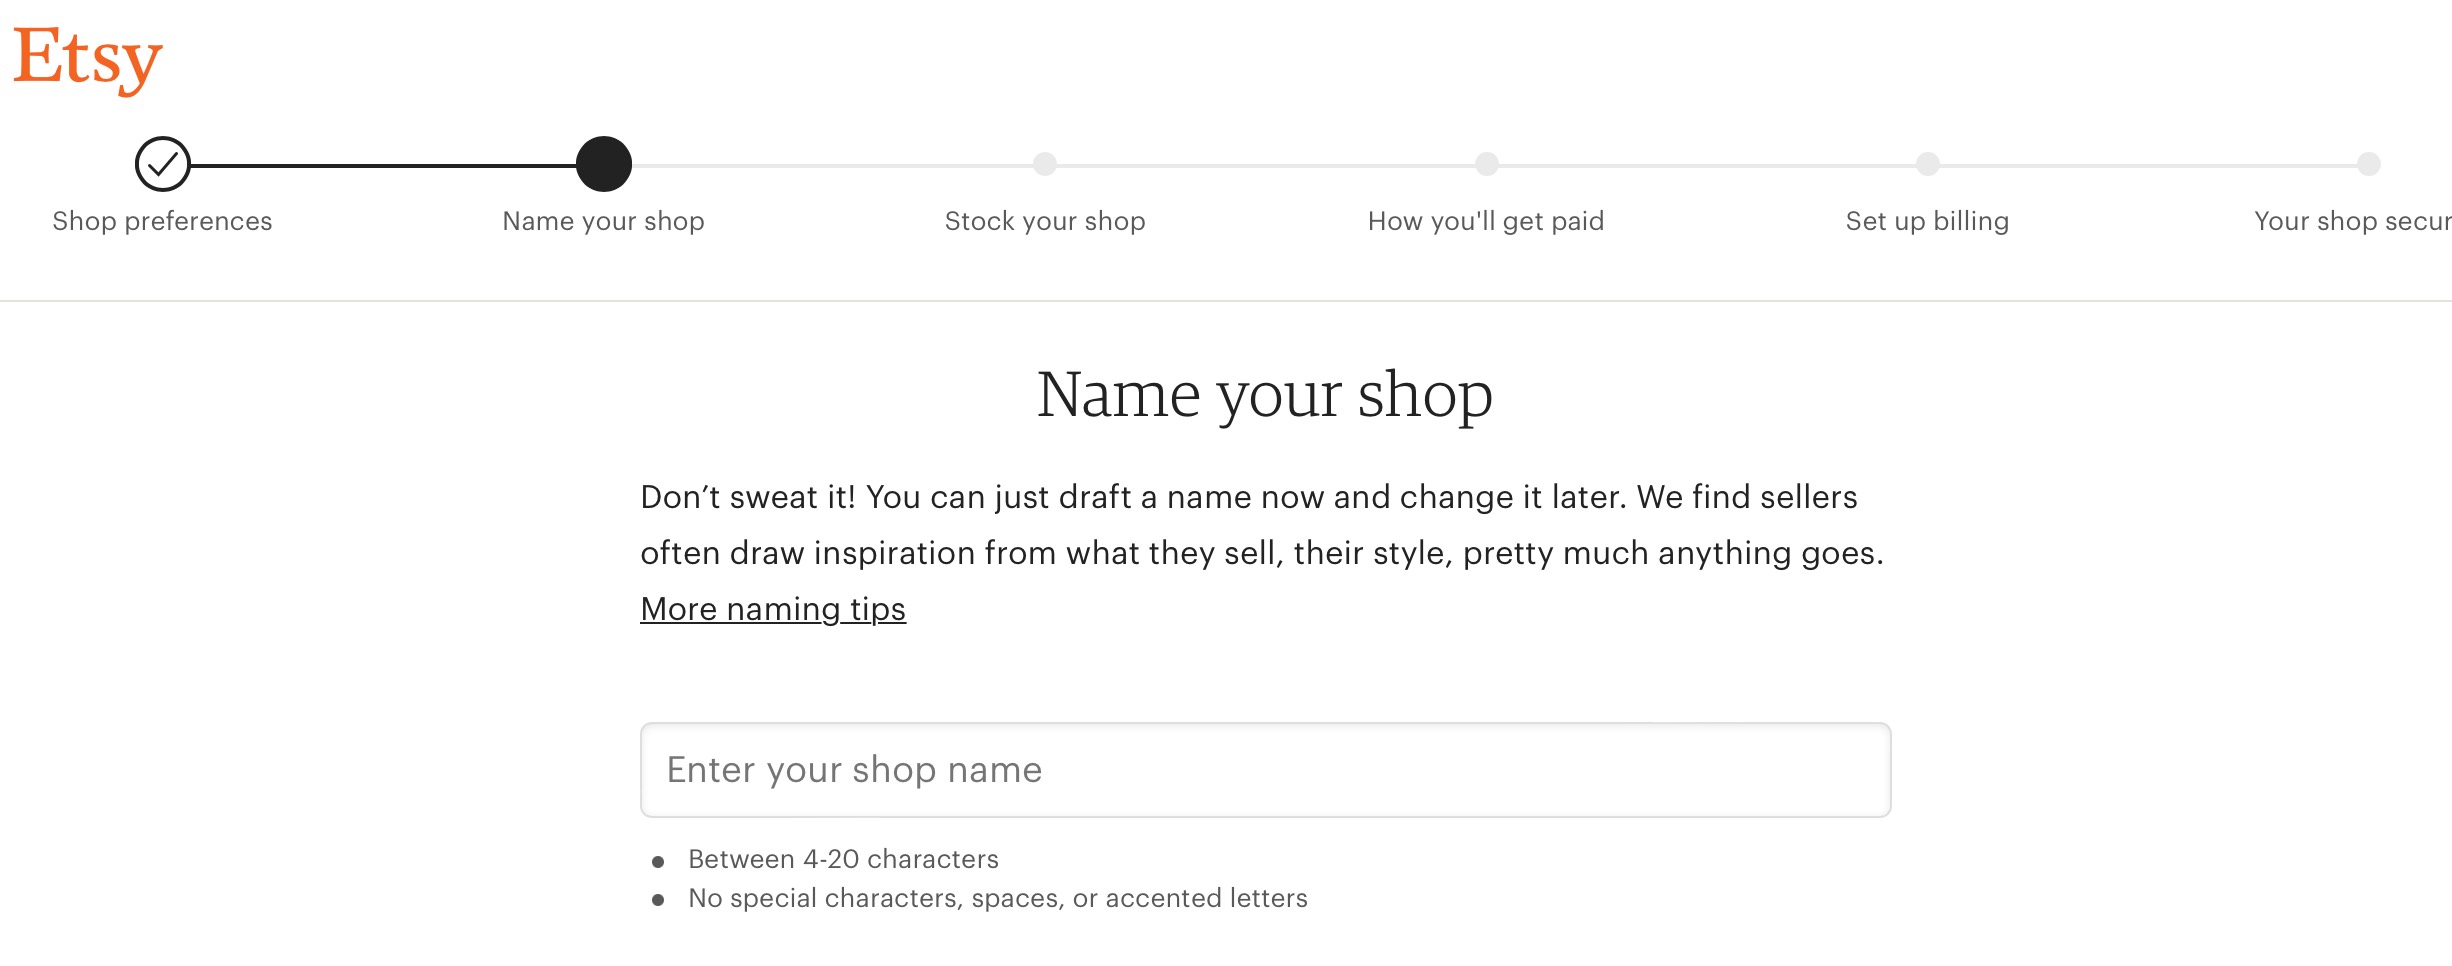 steps to open an etsy shop